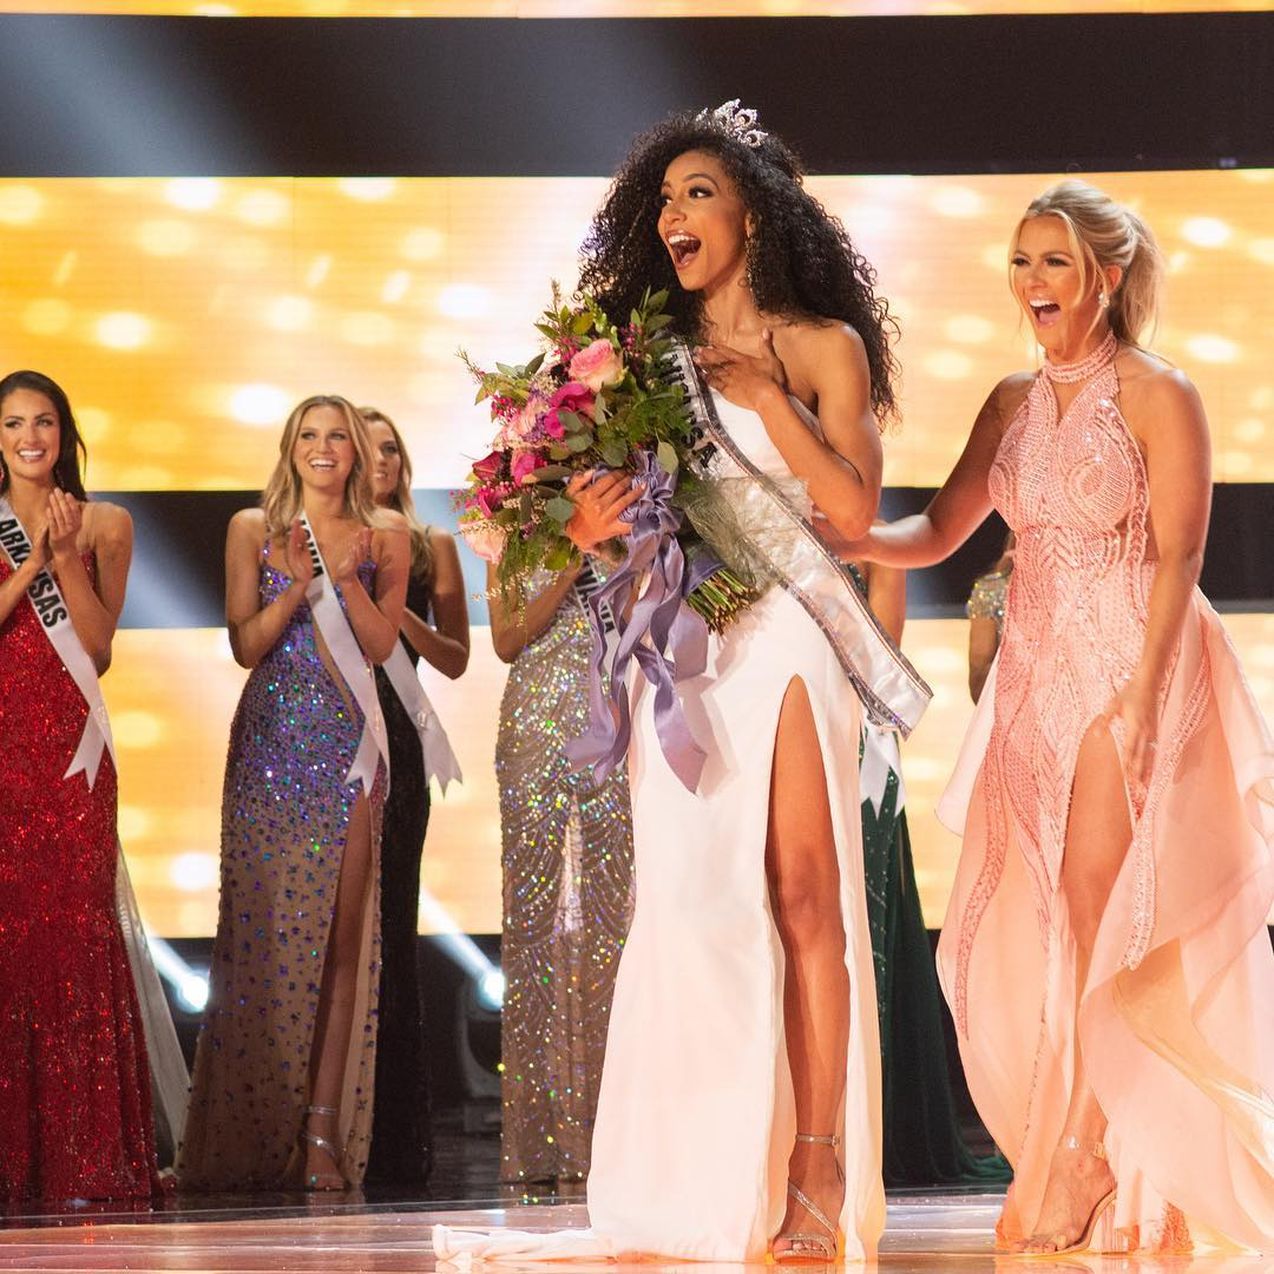 Cheslie Kryst, a former Miss USA winner and a correspondent at Extra, has d...